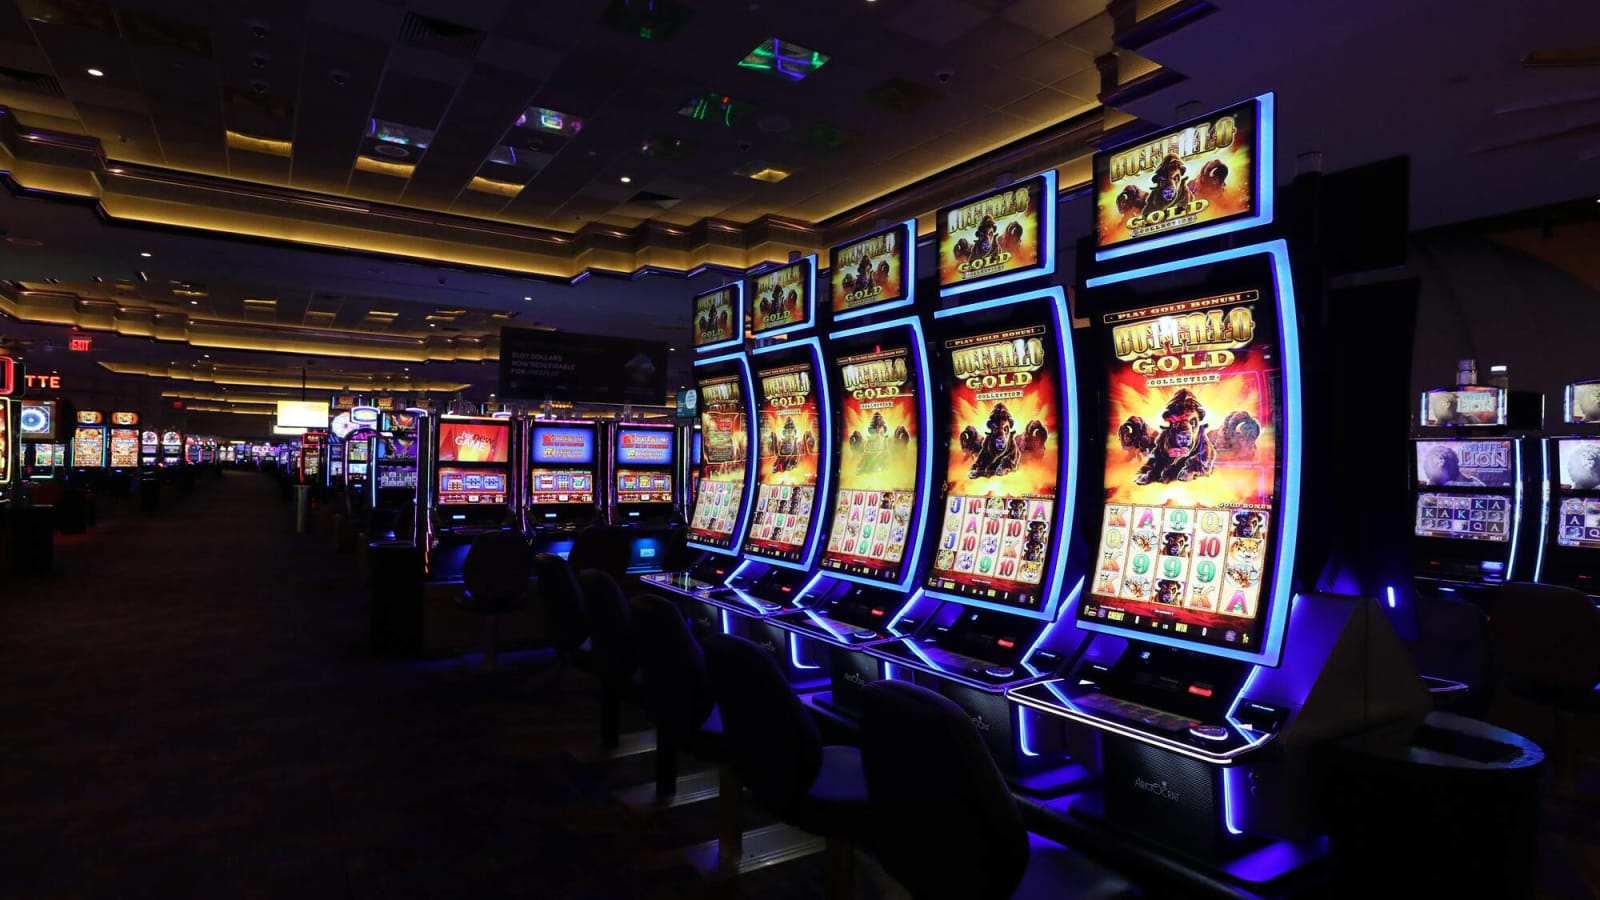 The Best Strategies for Playing Roulette at Golden Lion Casino Online